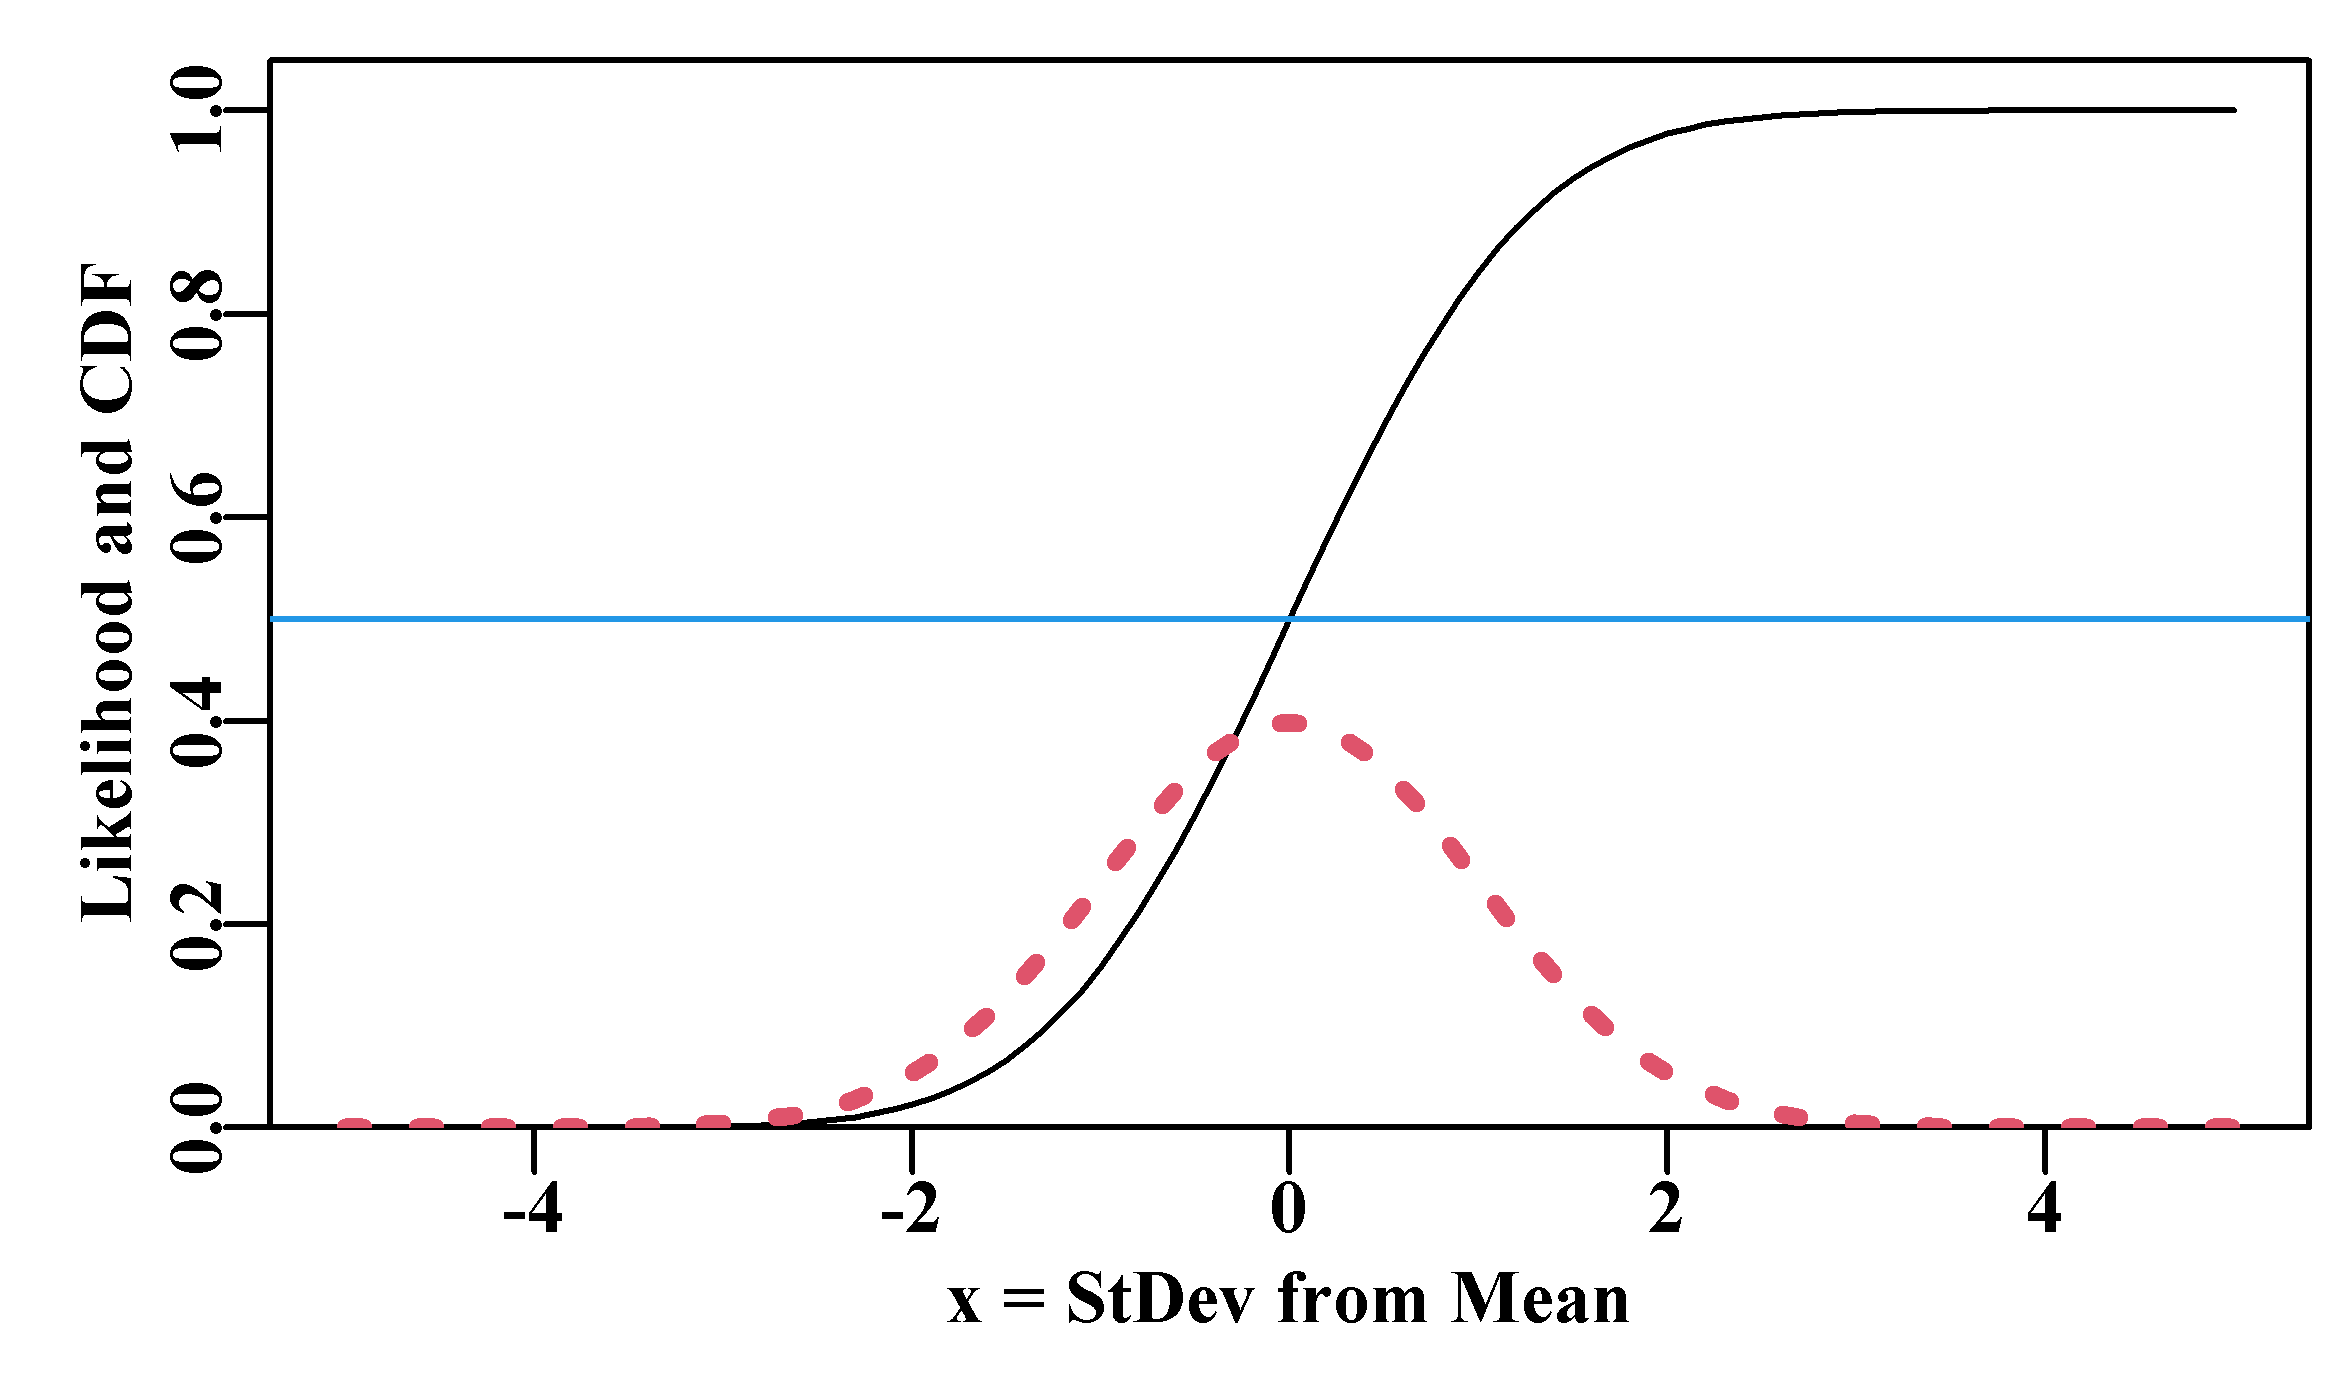 A dotted red curve depicting the expected normal likelihoods for a mean = 0 and sd = 1.0, along with the cumulative density of the same normal likelihoods as a black line. The blue line identifies a cumulative probability of 0.5.